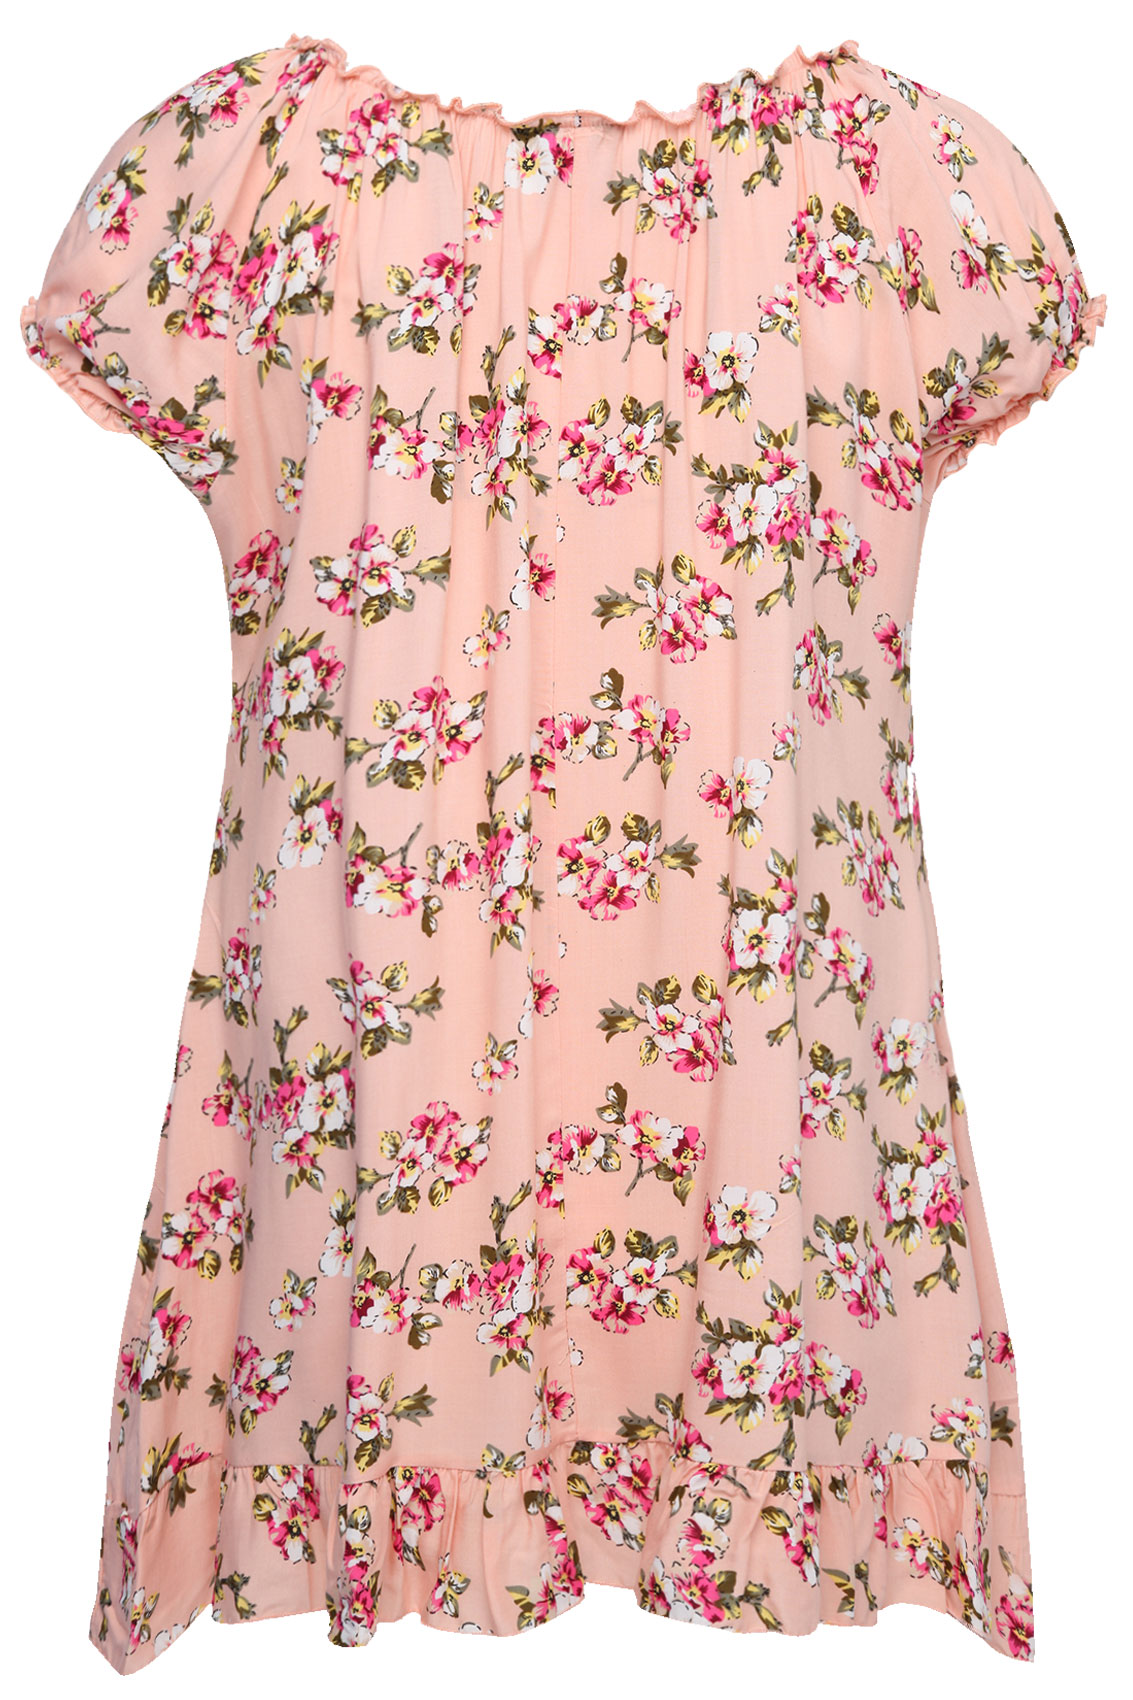 Coral Floral Print Longline Top With Frill Hem plus size 16,18,20,22,24 ...